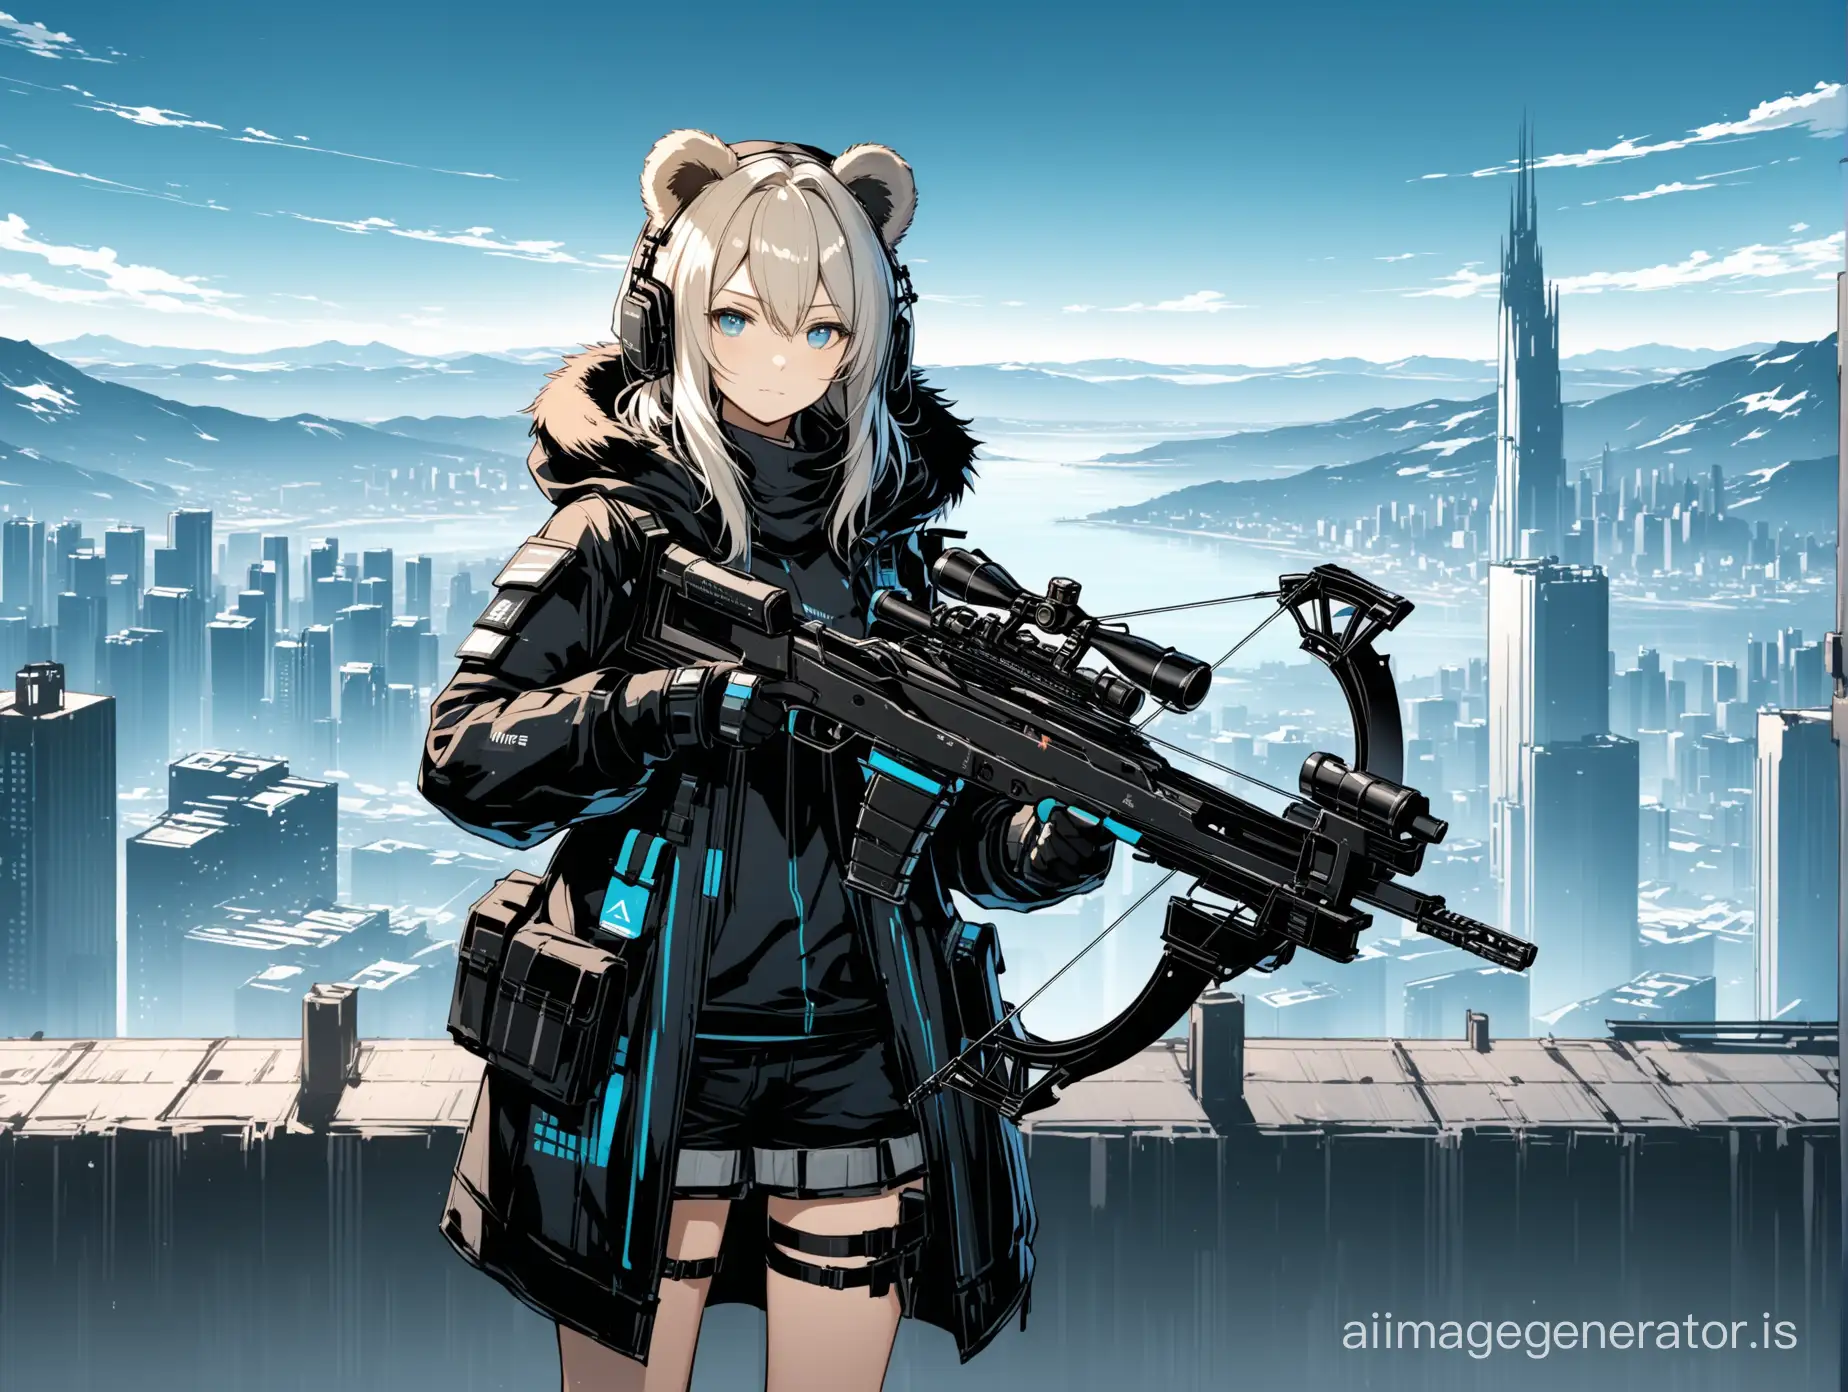 Arknights-Ursus-Girl-with-Crossbow-in-Urban-Setting